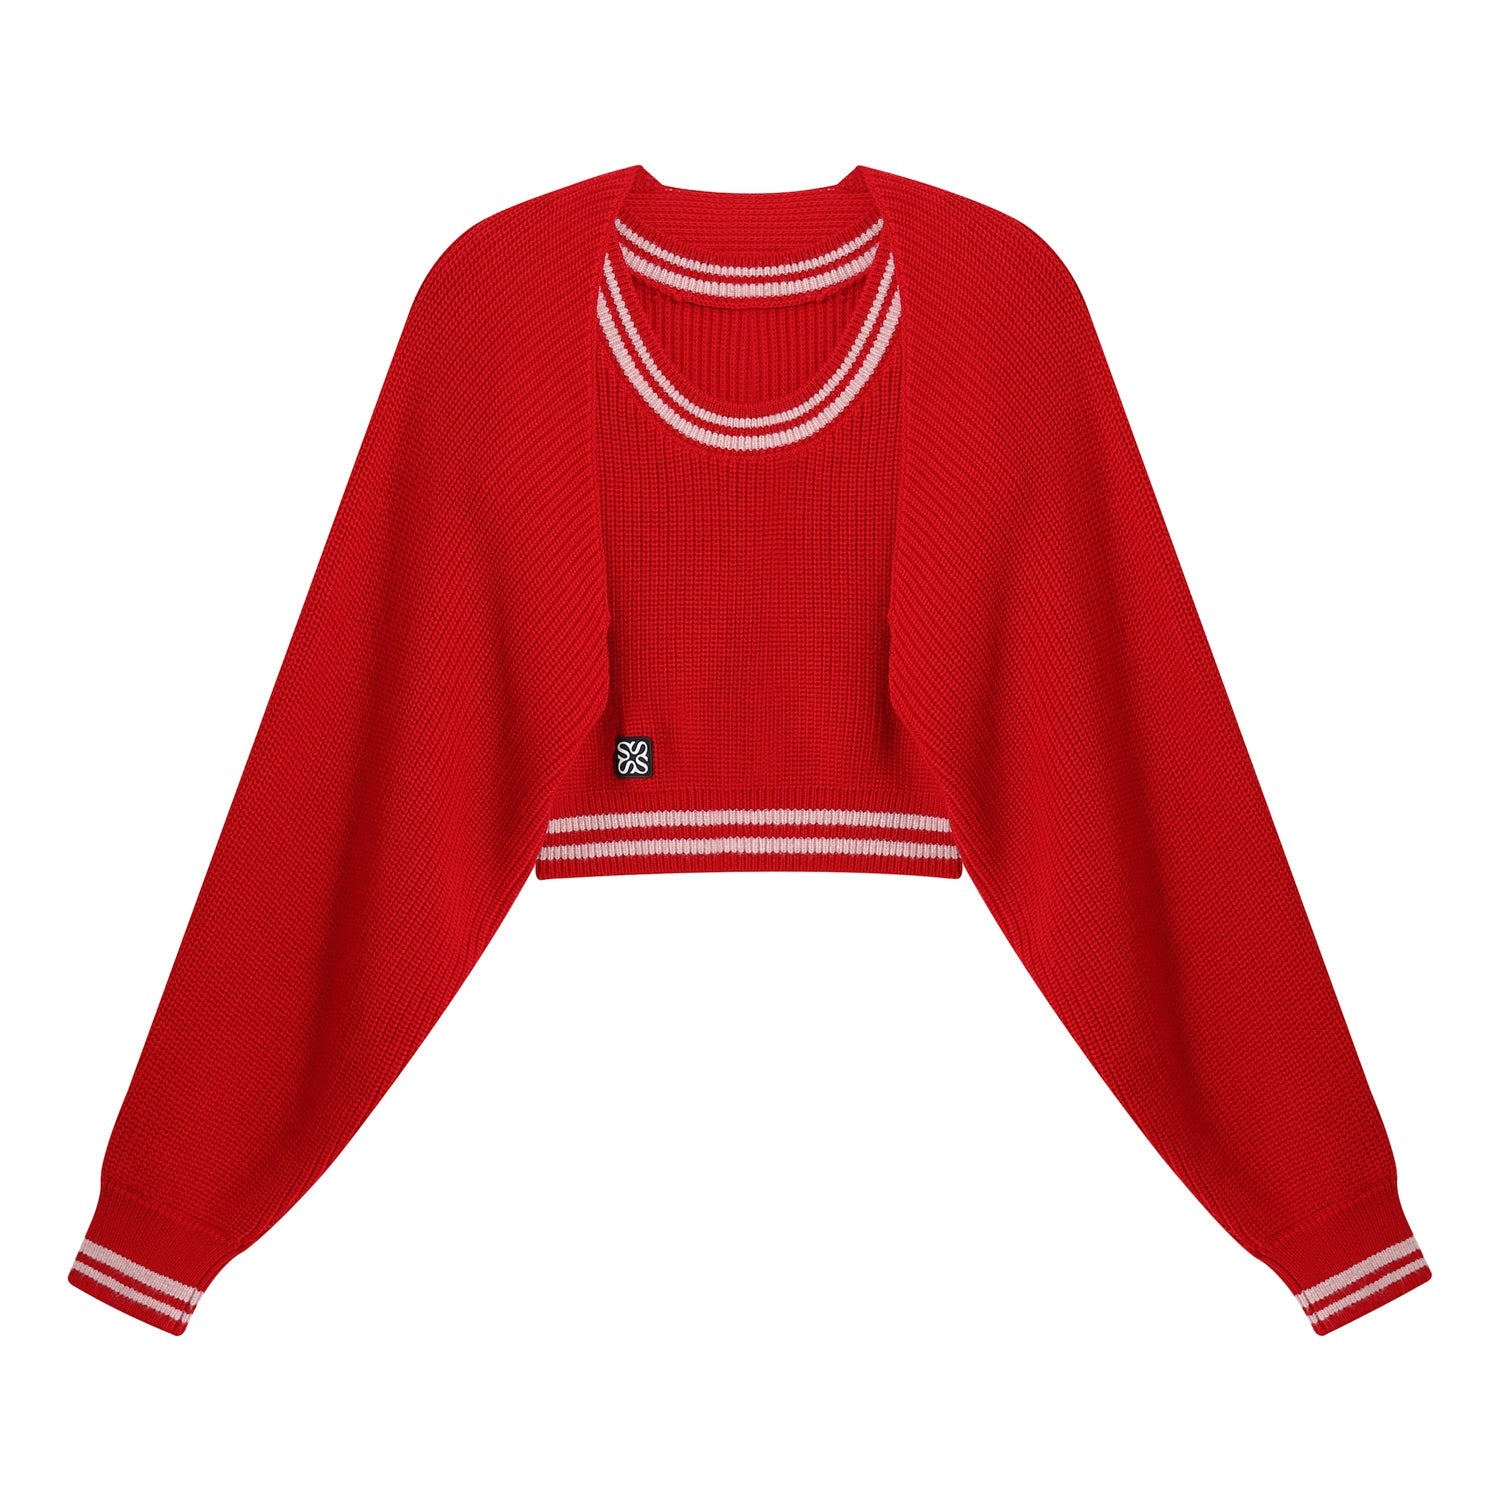 SOMESOWE Red And White Casual Slim Top Set In Knit | MADA IN CHINA